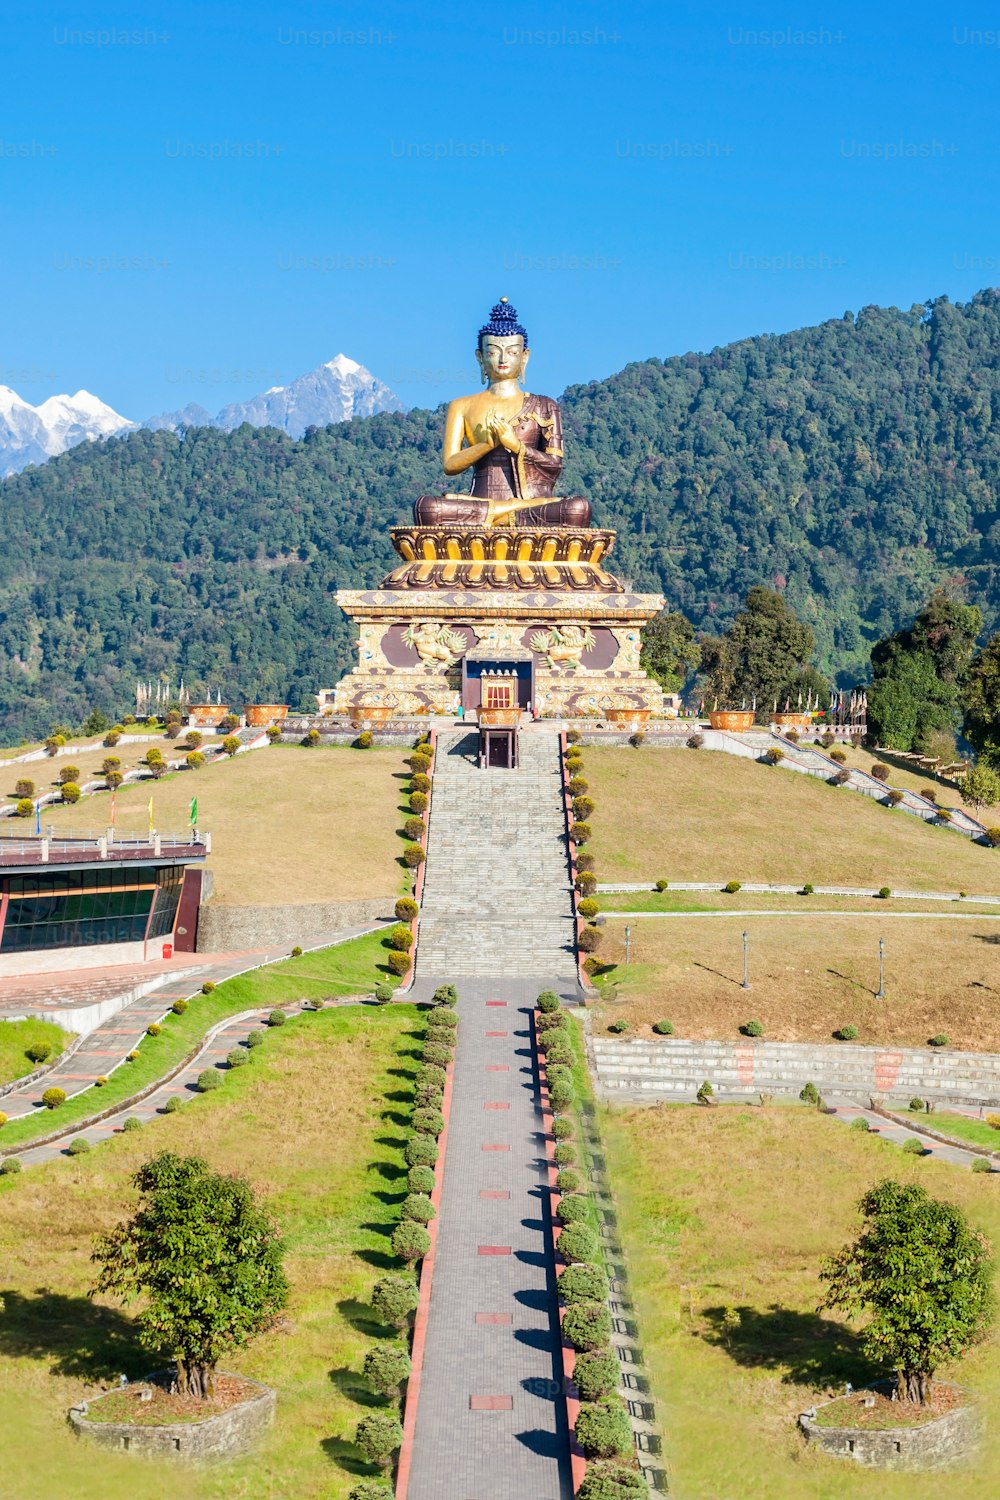 The Buddha Park of Ravangla, also known as Tathagata Tsal, is situated near Rabong in South Sikkim district, Sikkim, India